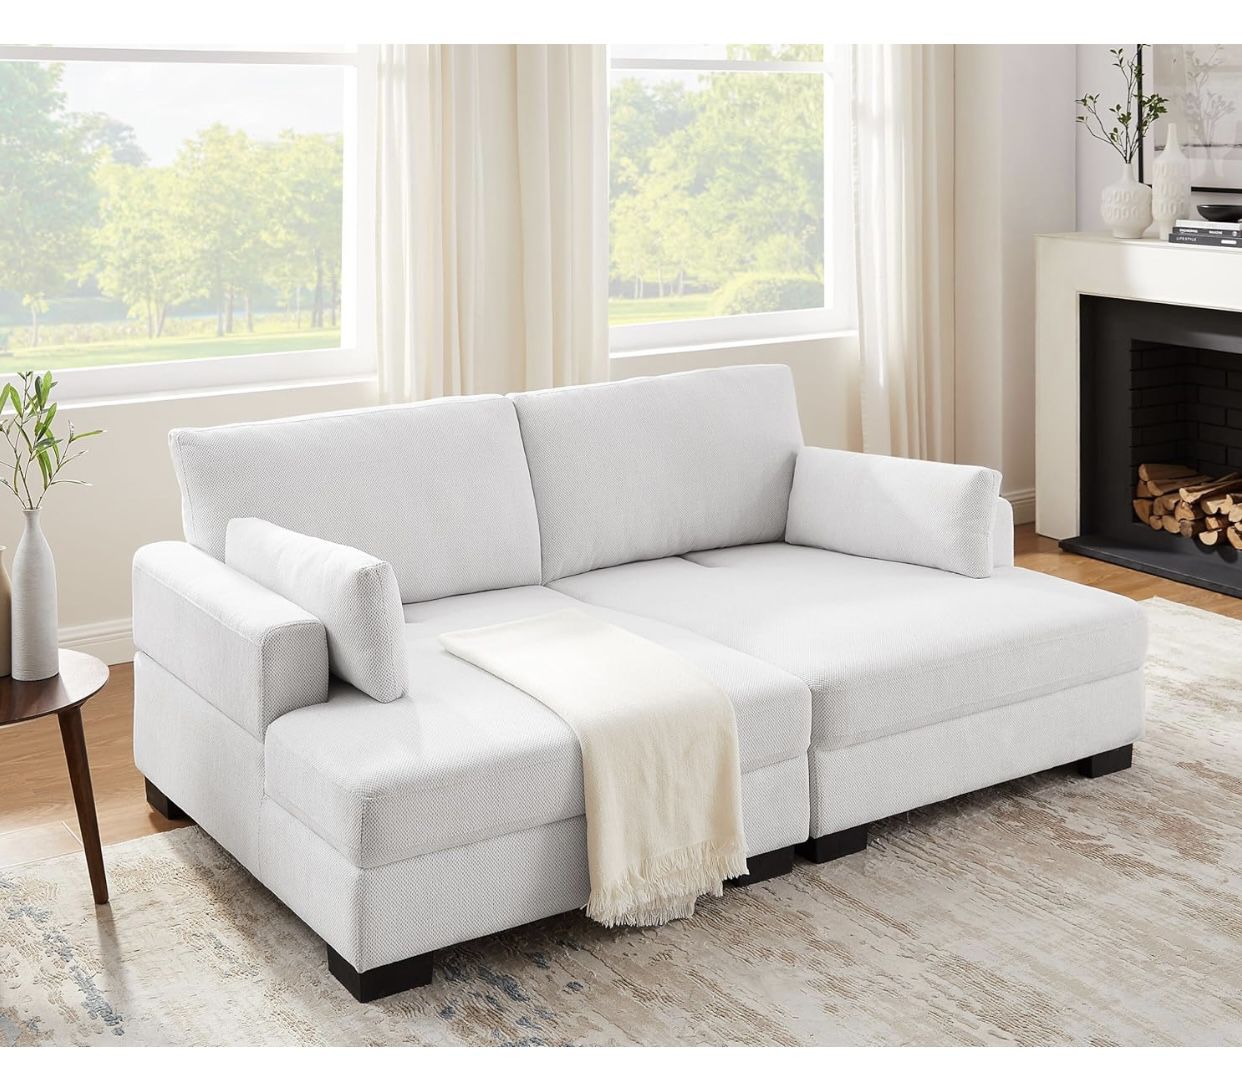 New in box Vanomi Multifunctional Loveseat Sofa, Easily Converts from Sofa Couch to Sofa Bed-beige